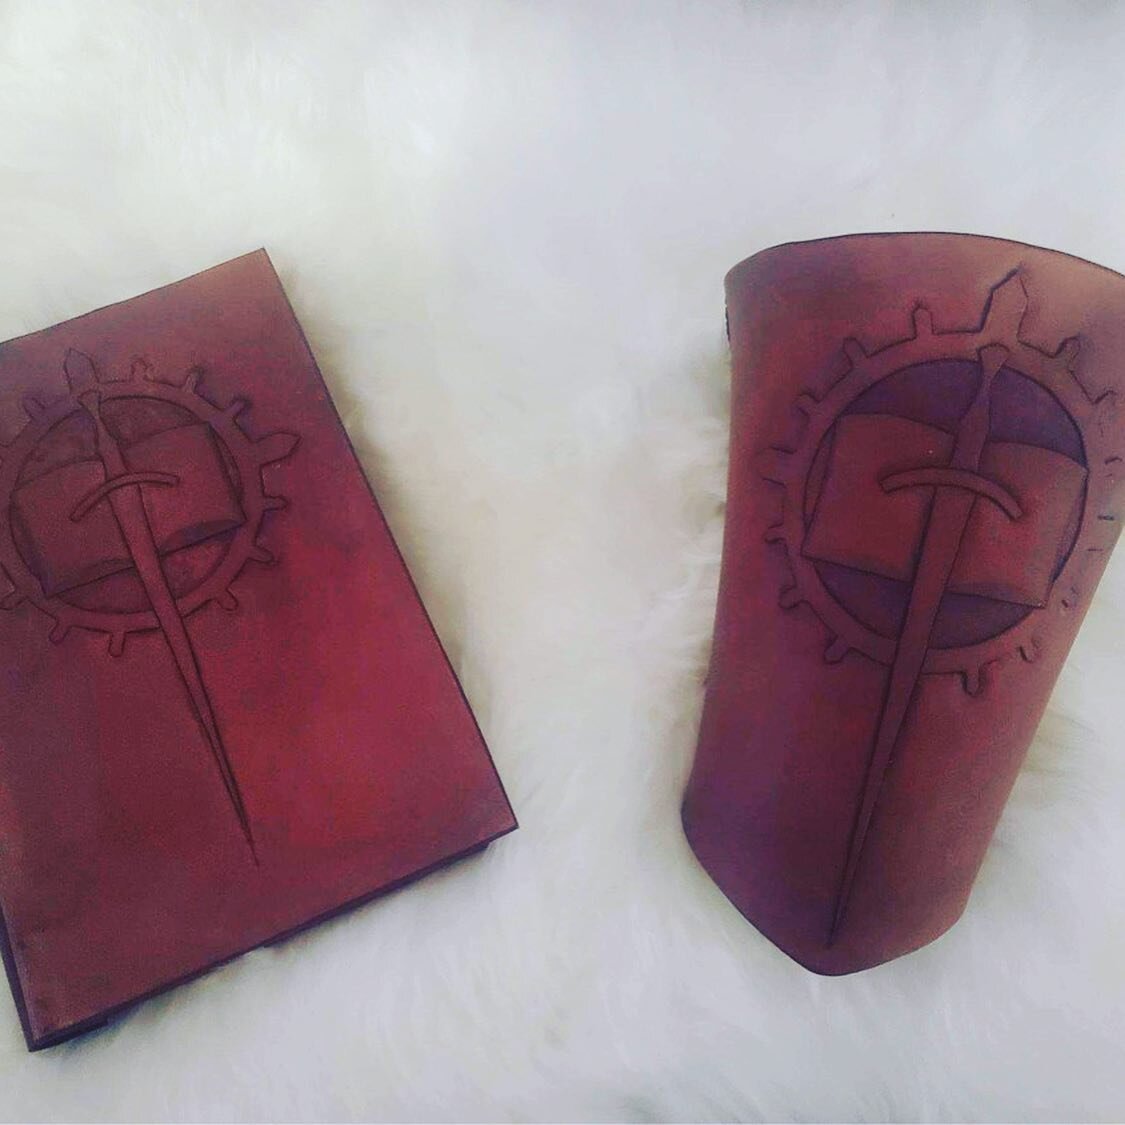 New items up in our store! Would you like to support us while buying good quality and story-integrated props for LARP? Want to jot down notes in a gorgeous hand crafted notebook while sipping from your cool new coffee mug? You&rsquo;d be helping us o